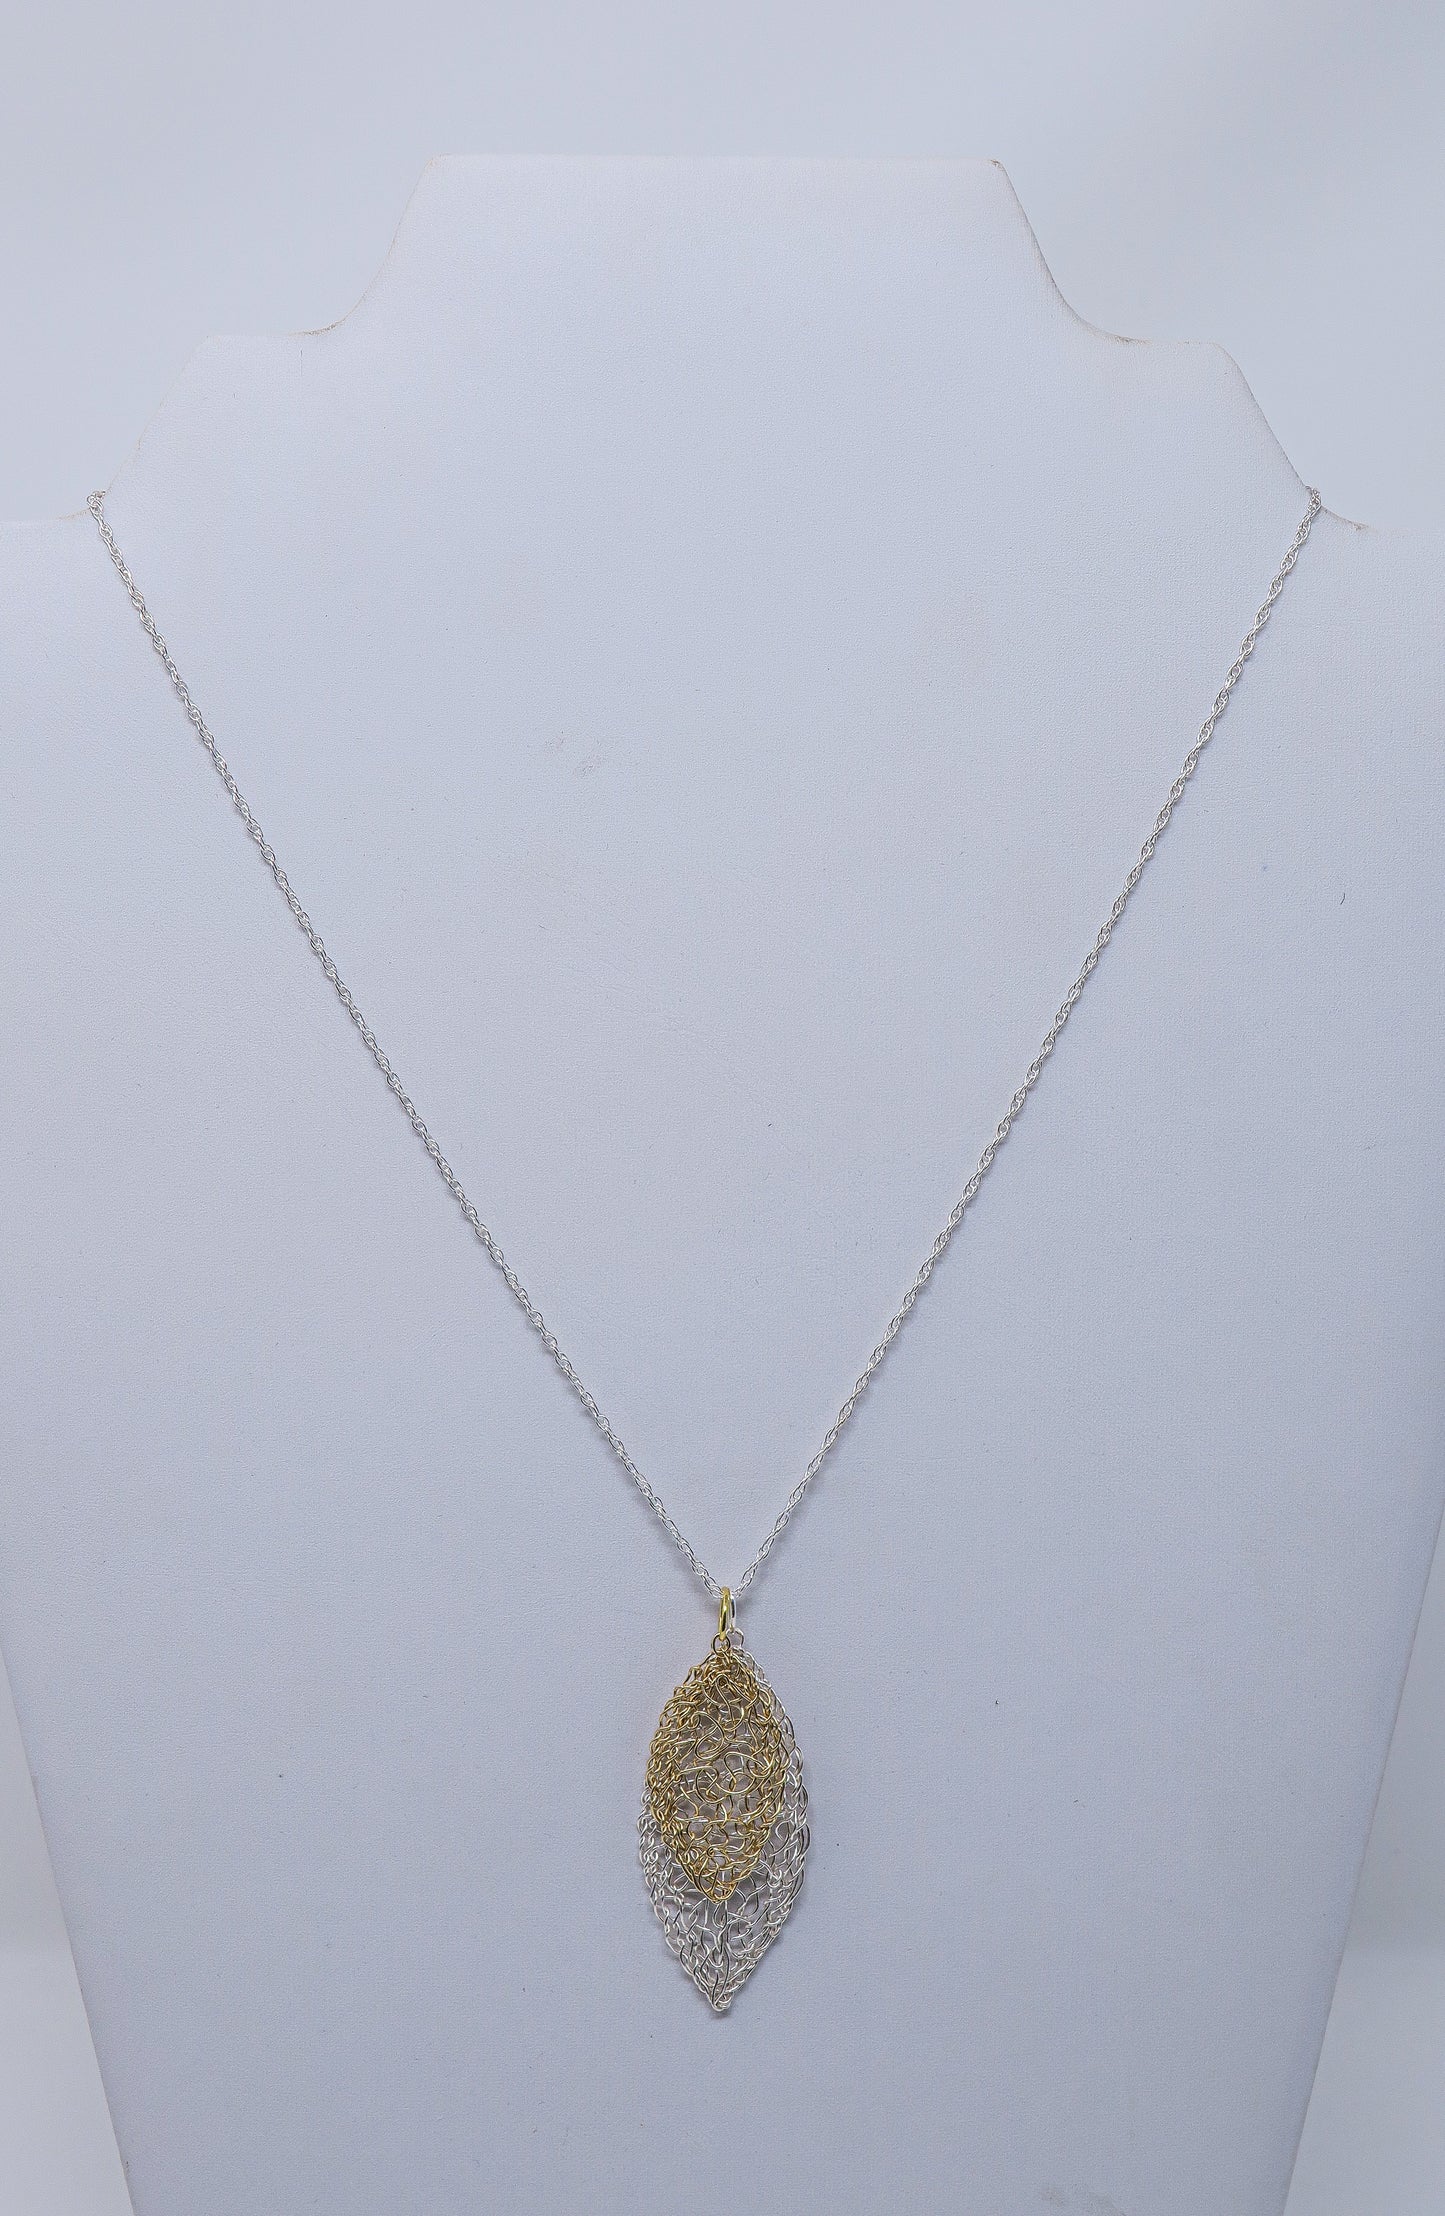 Gold-filled and Silver Leaf Pendants on a 925 Silver Chain | by Kathryn Stanko